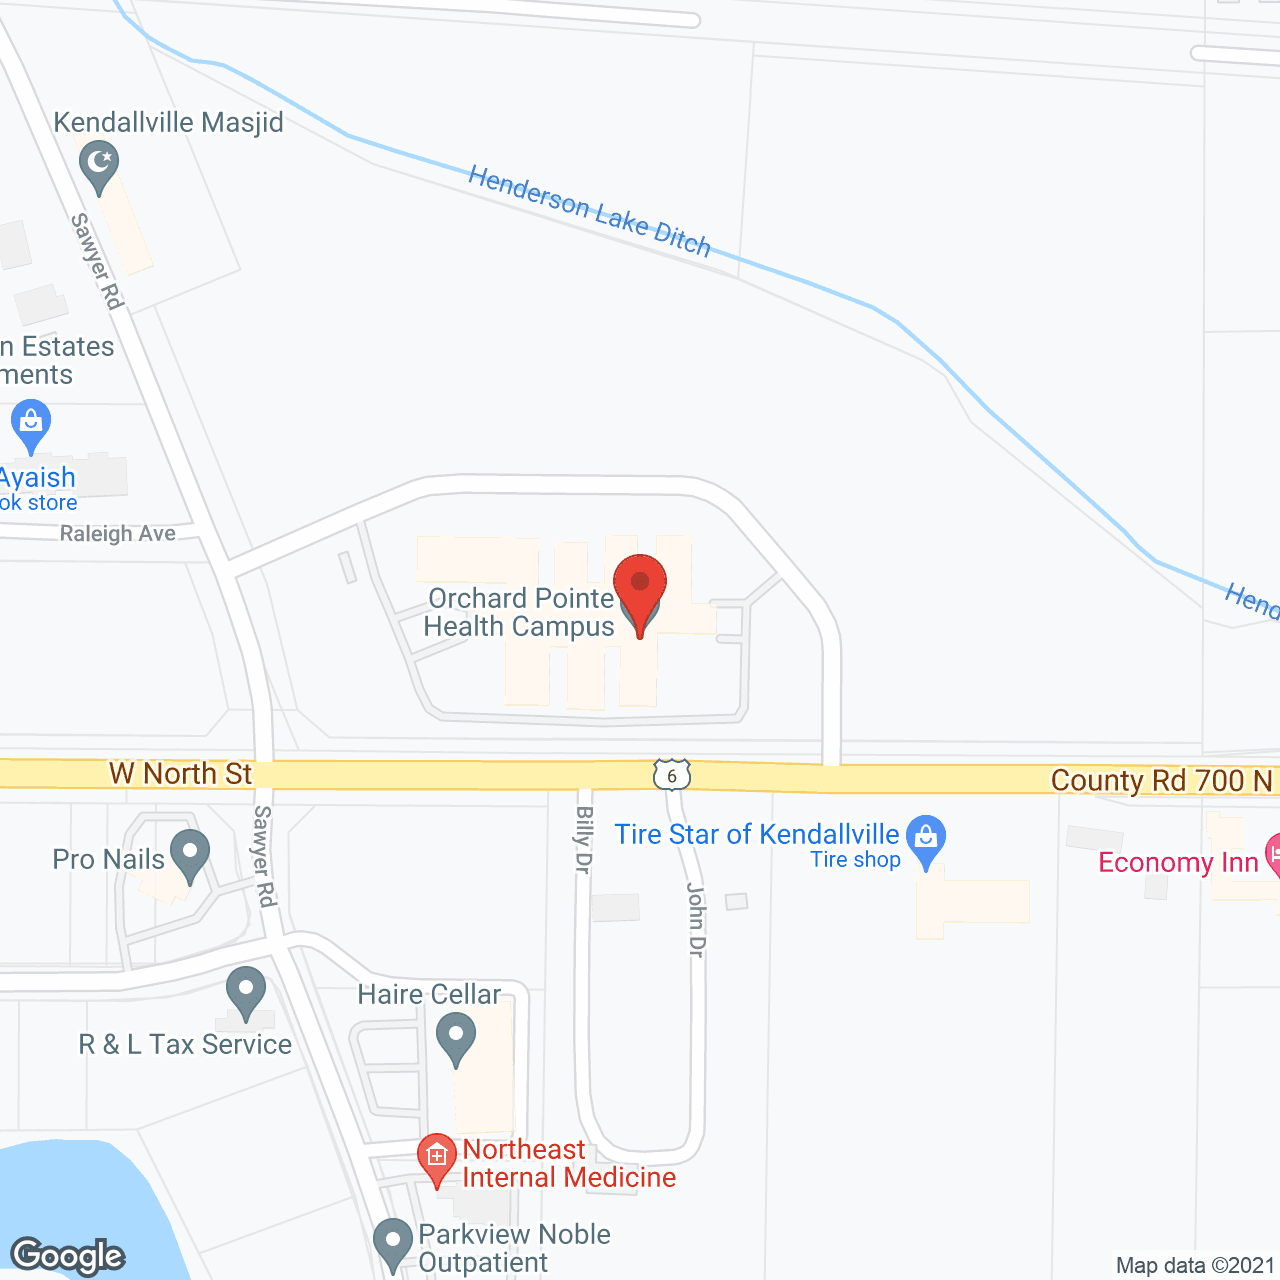 Orchard Pointe Health Campus in google map